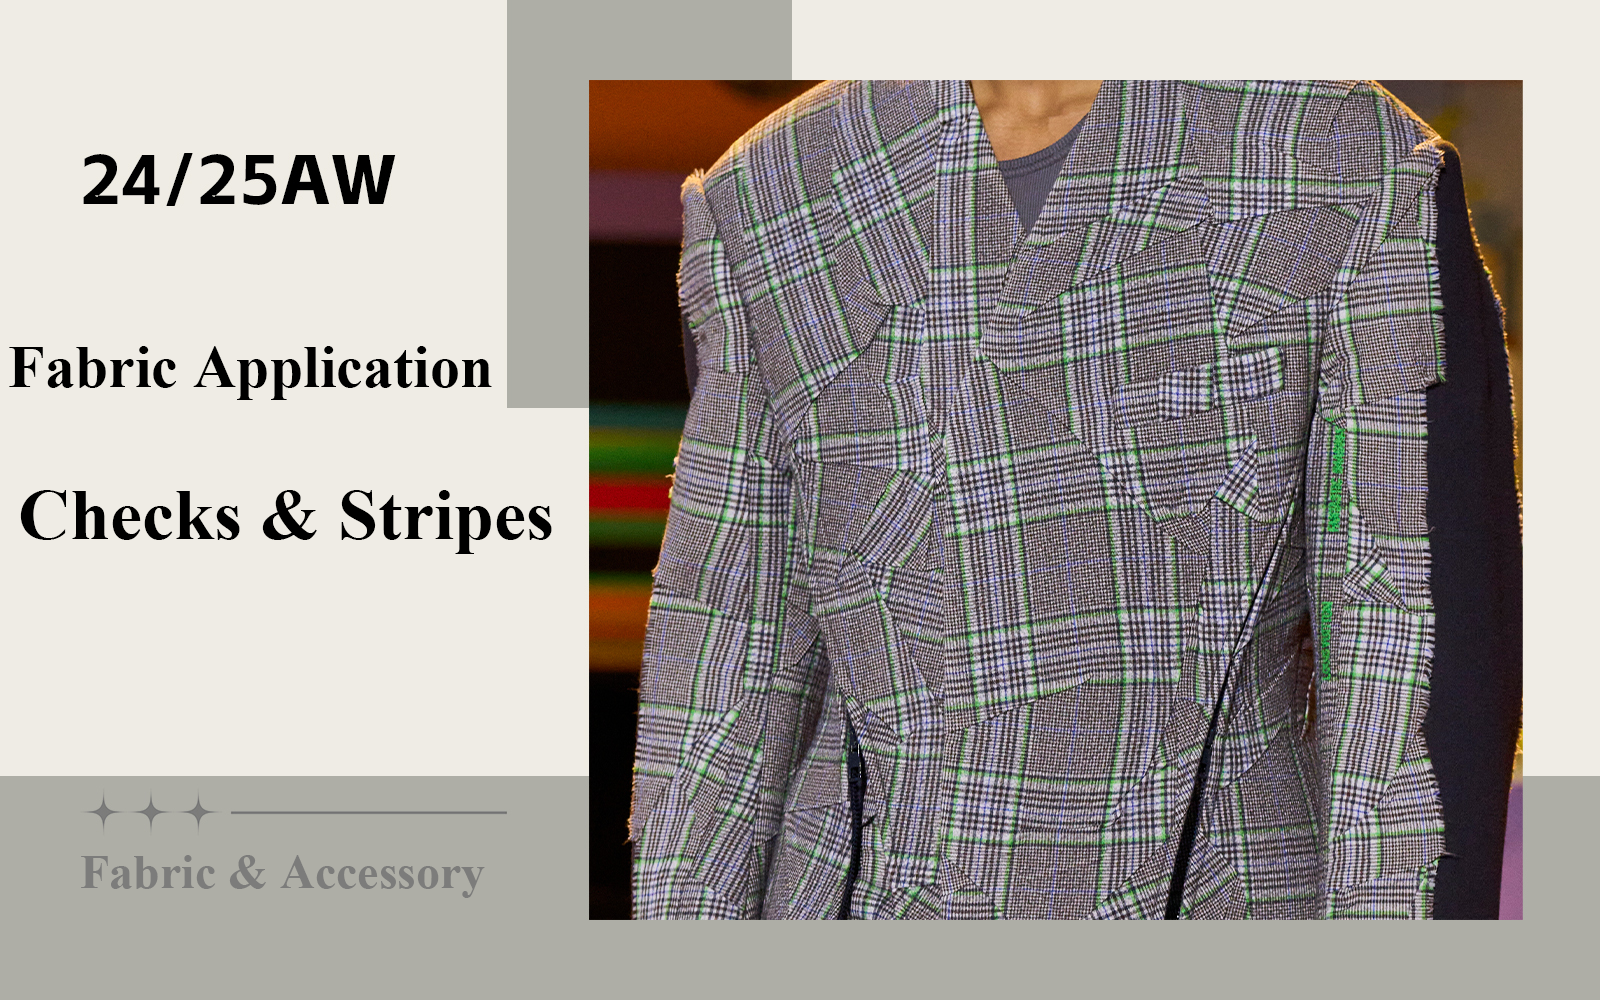 The Check & Stripe Fabric Trend for Casual Business Menswear